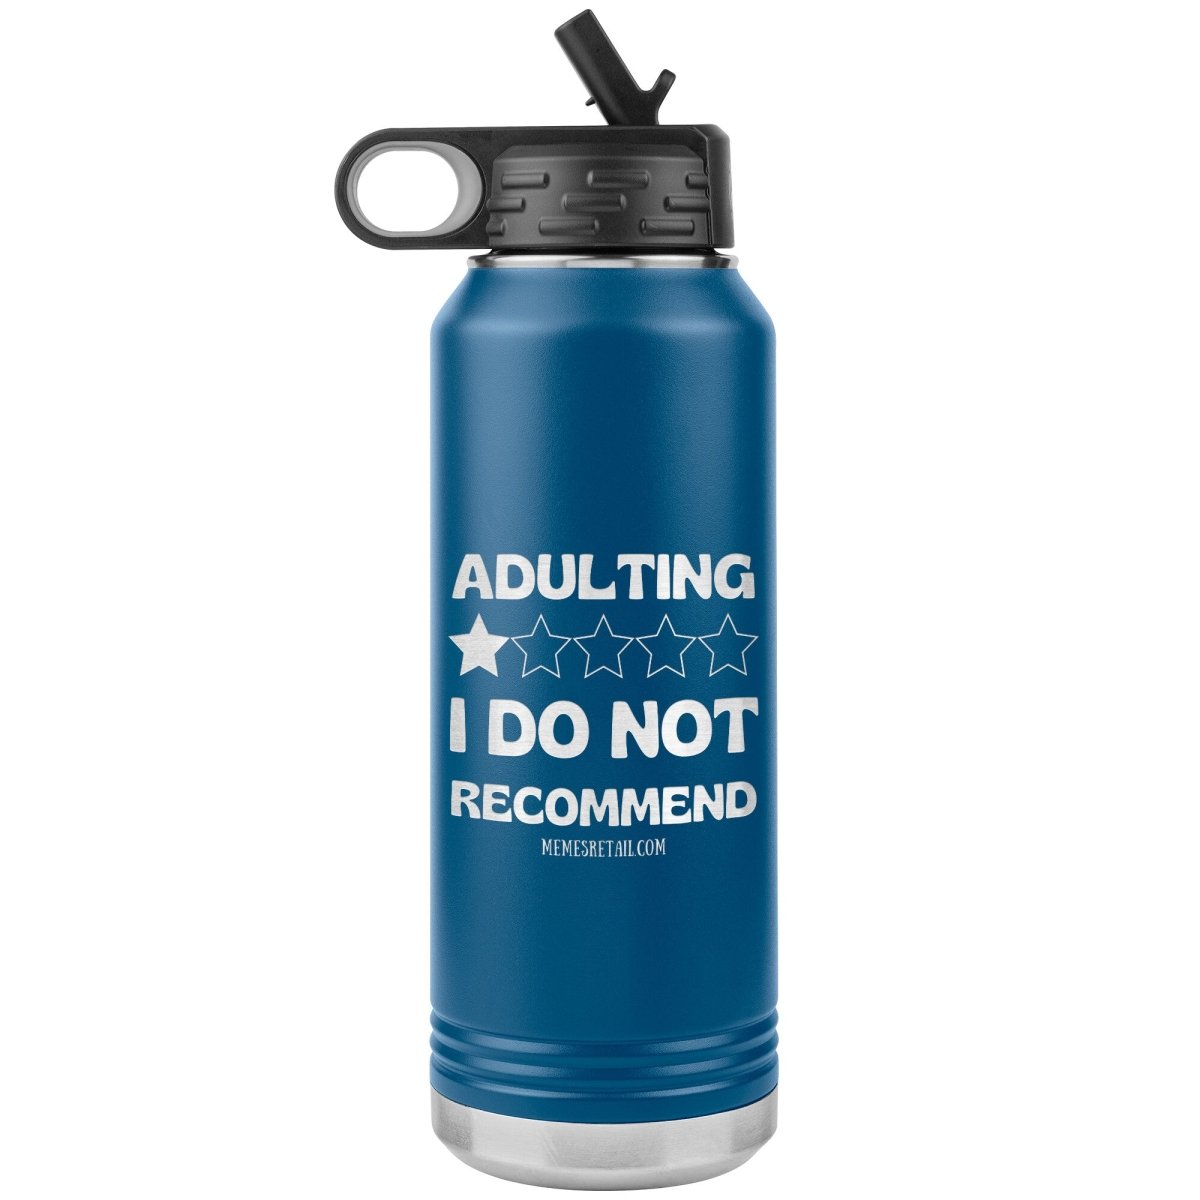 Adulting, 1 Star, I do not recommend 32oz Water Tumblers, Blue - MemesRetail.com